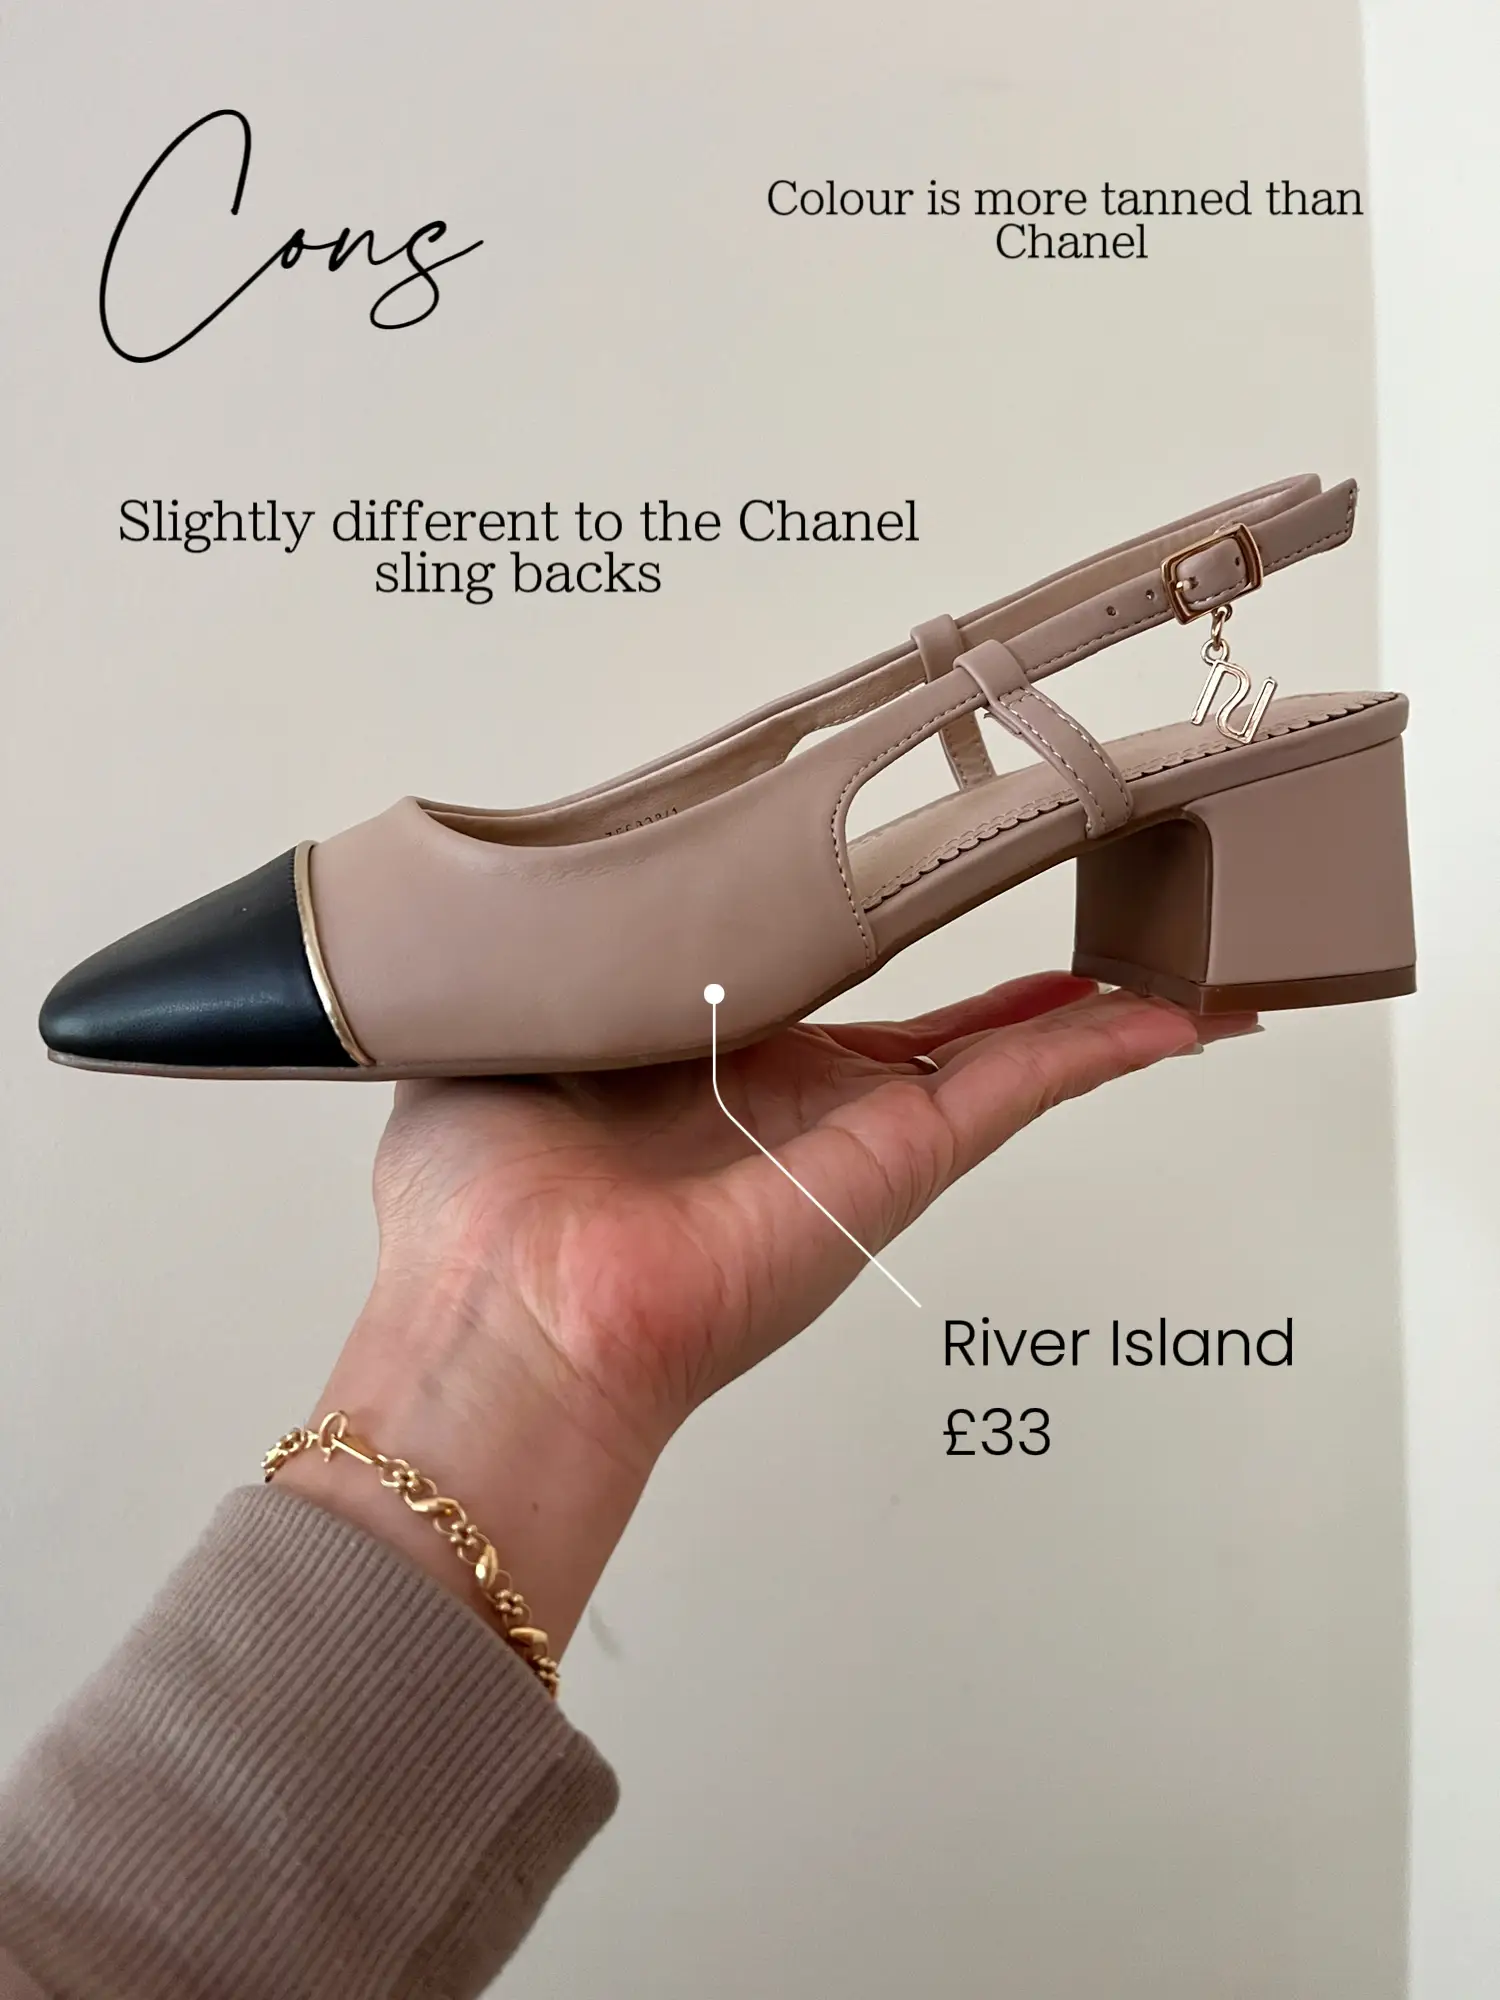 Chanel Dupe from River Island Review, Gallery posted by JuliaSH